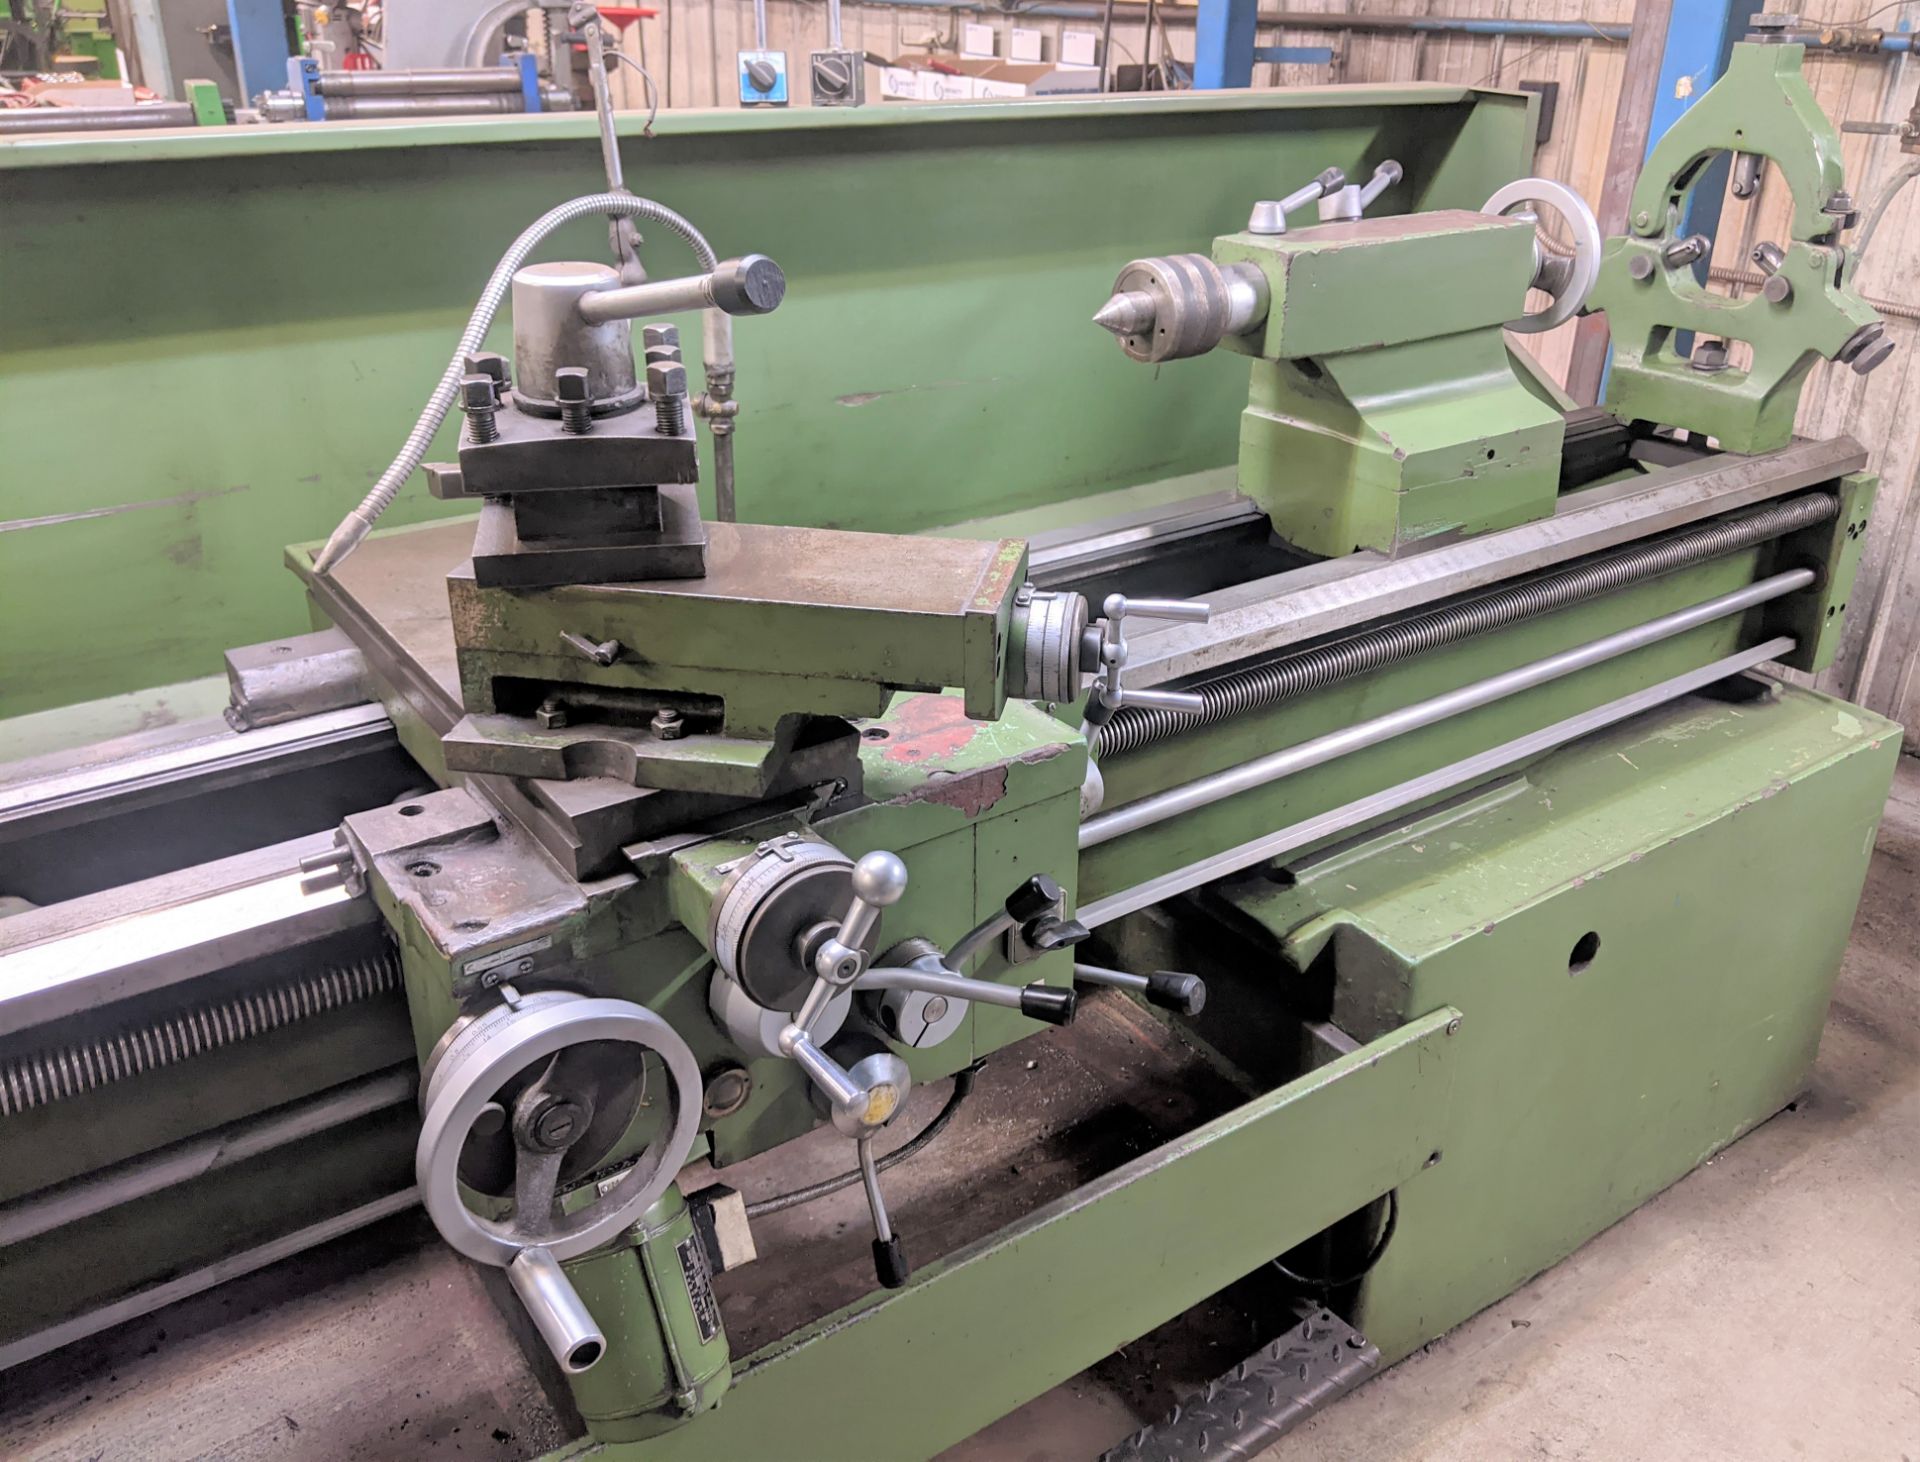 PROSTAR 6250 LATHE, 20" X 80", 12" 3-JAW CHUCK, 2.5" BORE, TAILSTOCK, STEADY REST, TOOL POST, SPEEDS - Image 5 of 10